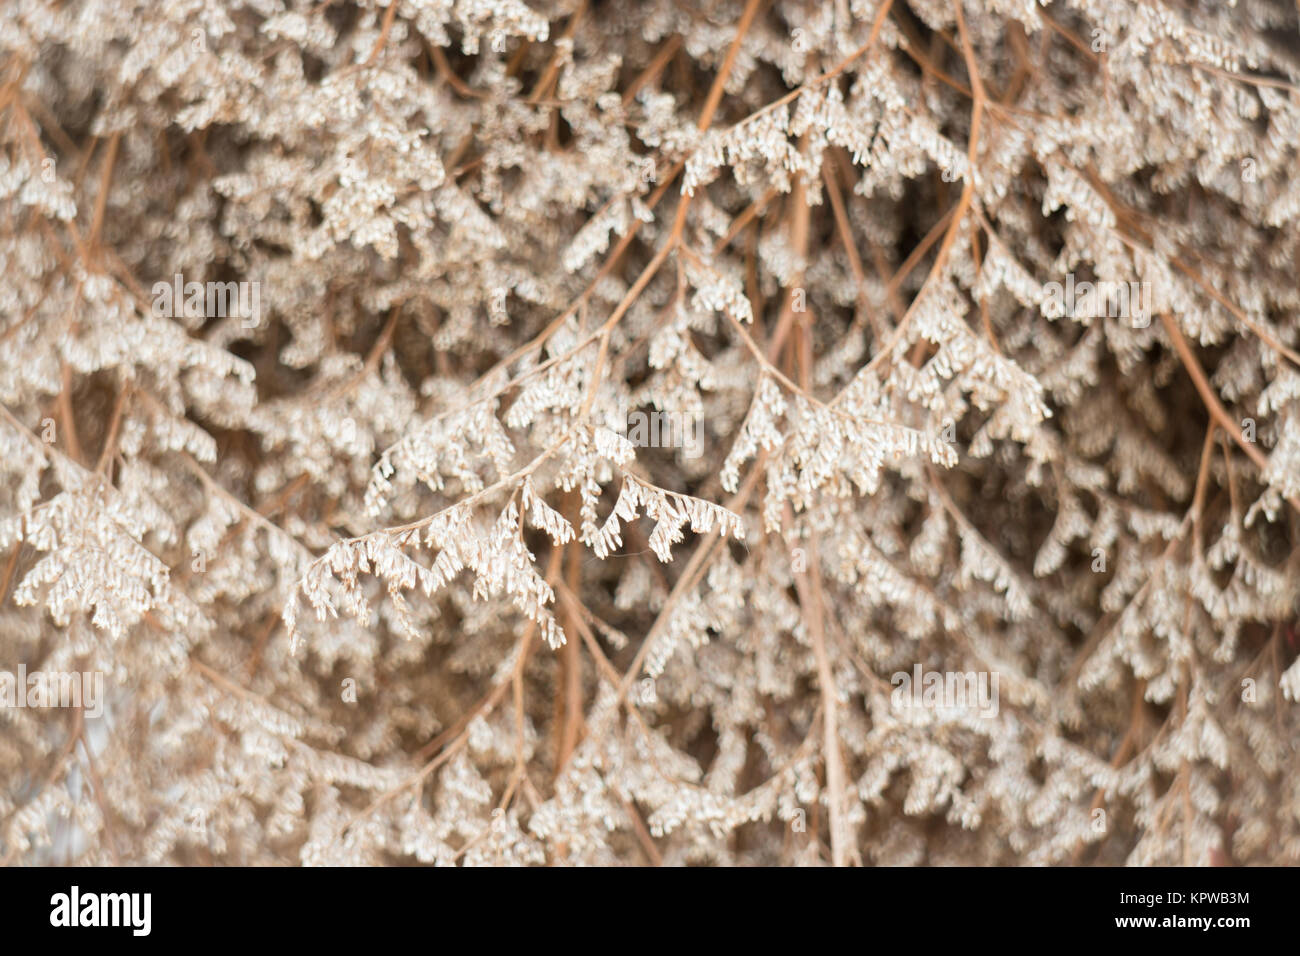 Dried statice flowers vintage style Stock Photo